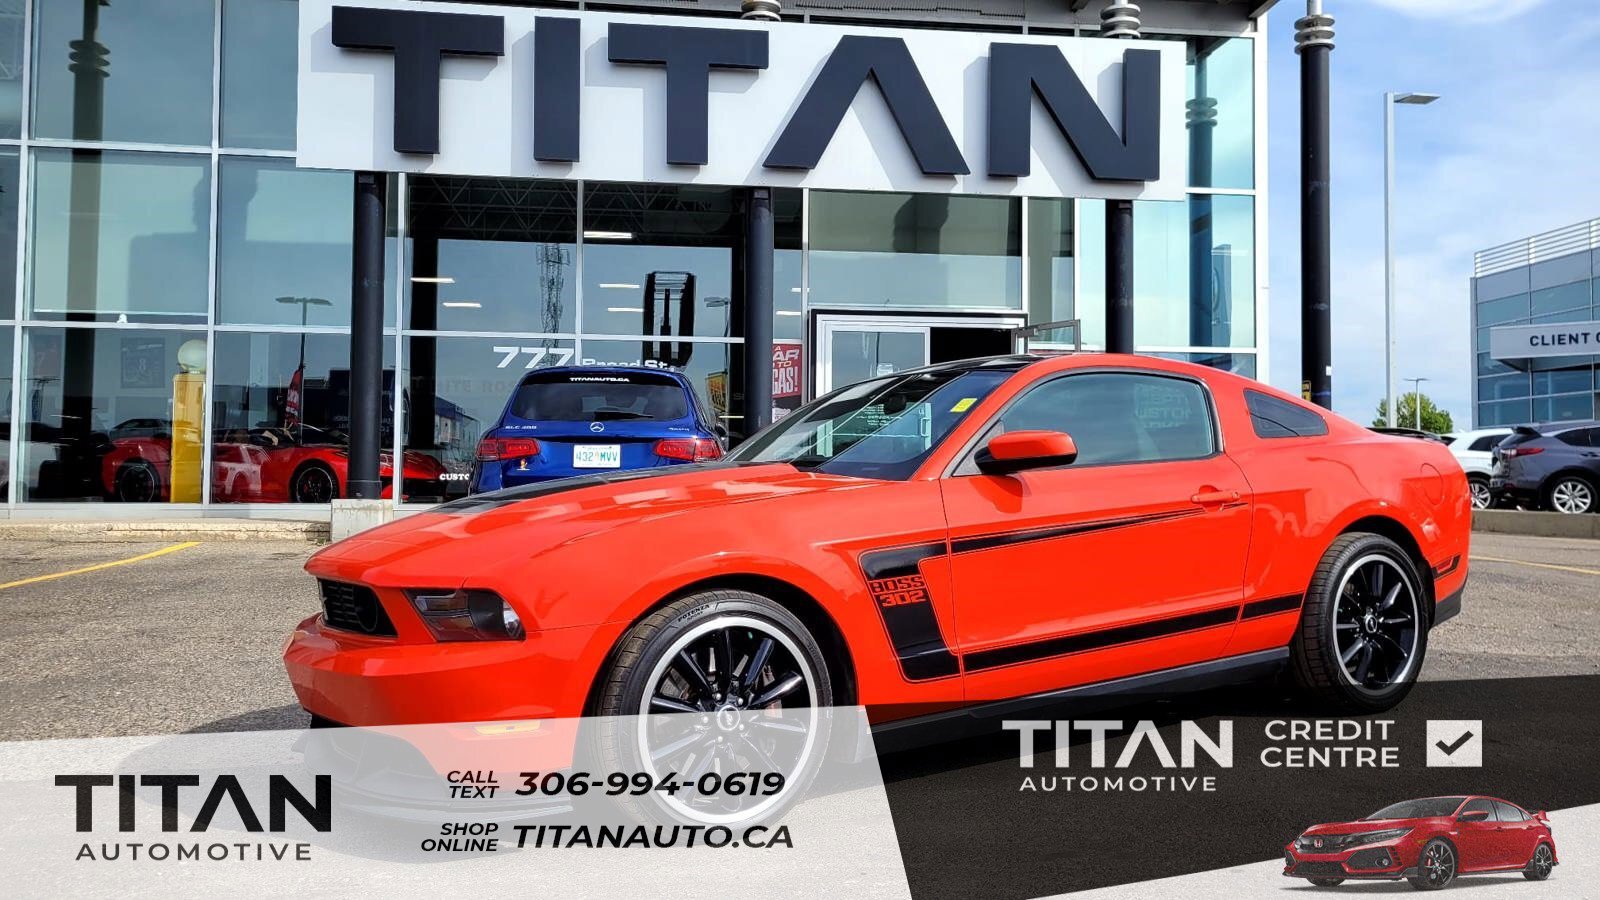 2012 Ford Mustang Boss 302 | Competition Orange | 6spd Manual | 444h